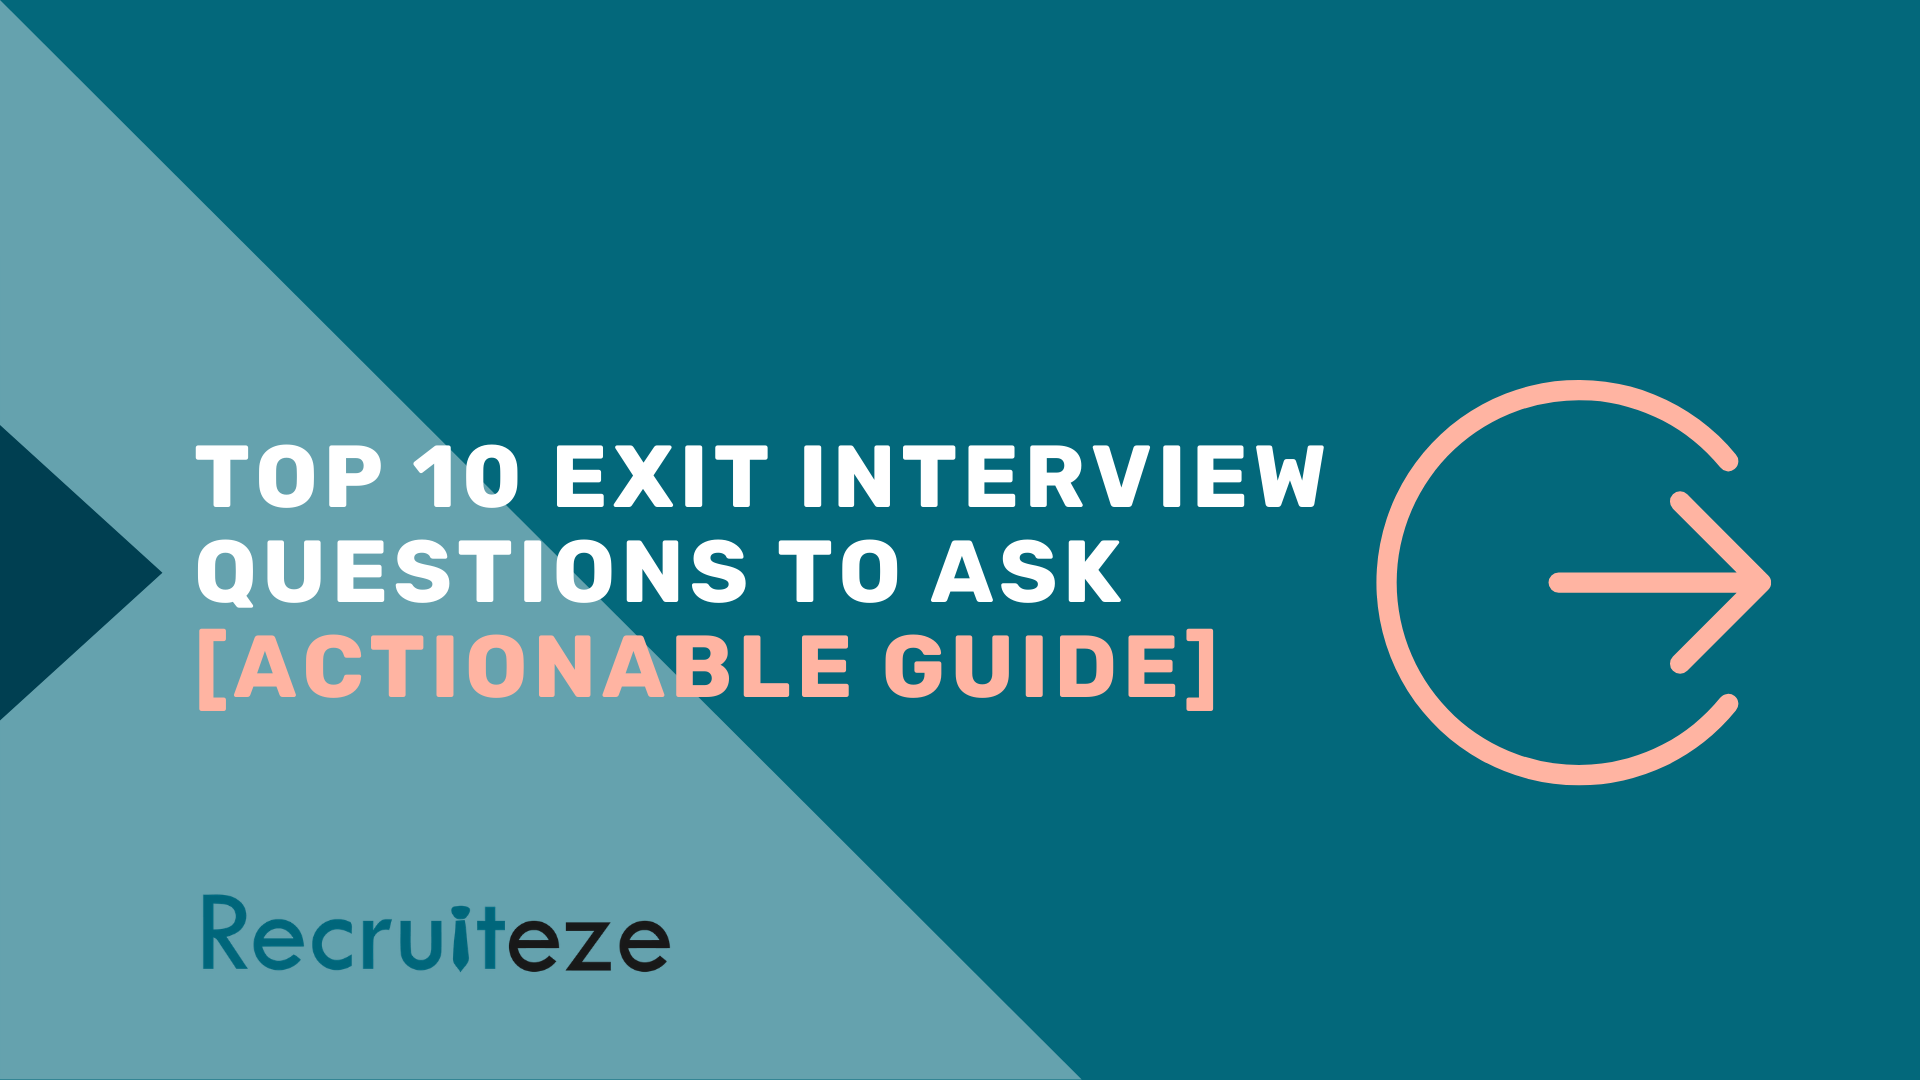 Top 10 exist interview questions to ask - Recruiteze featured image